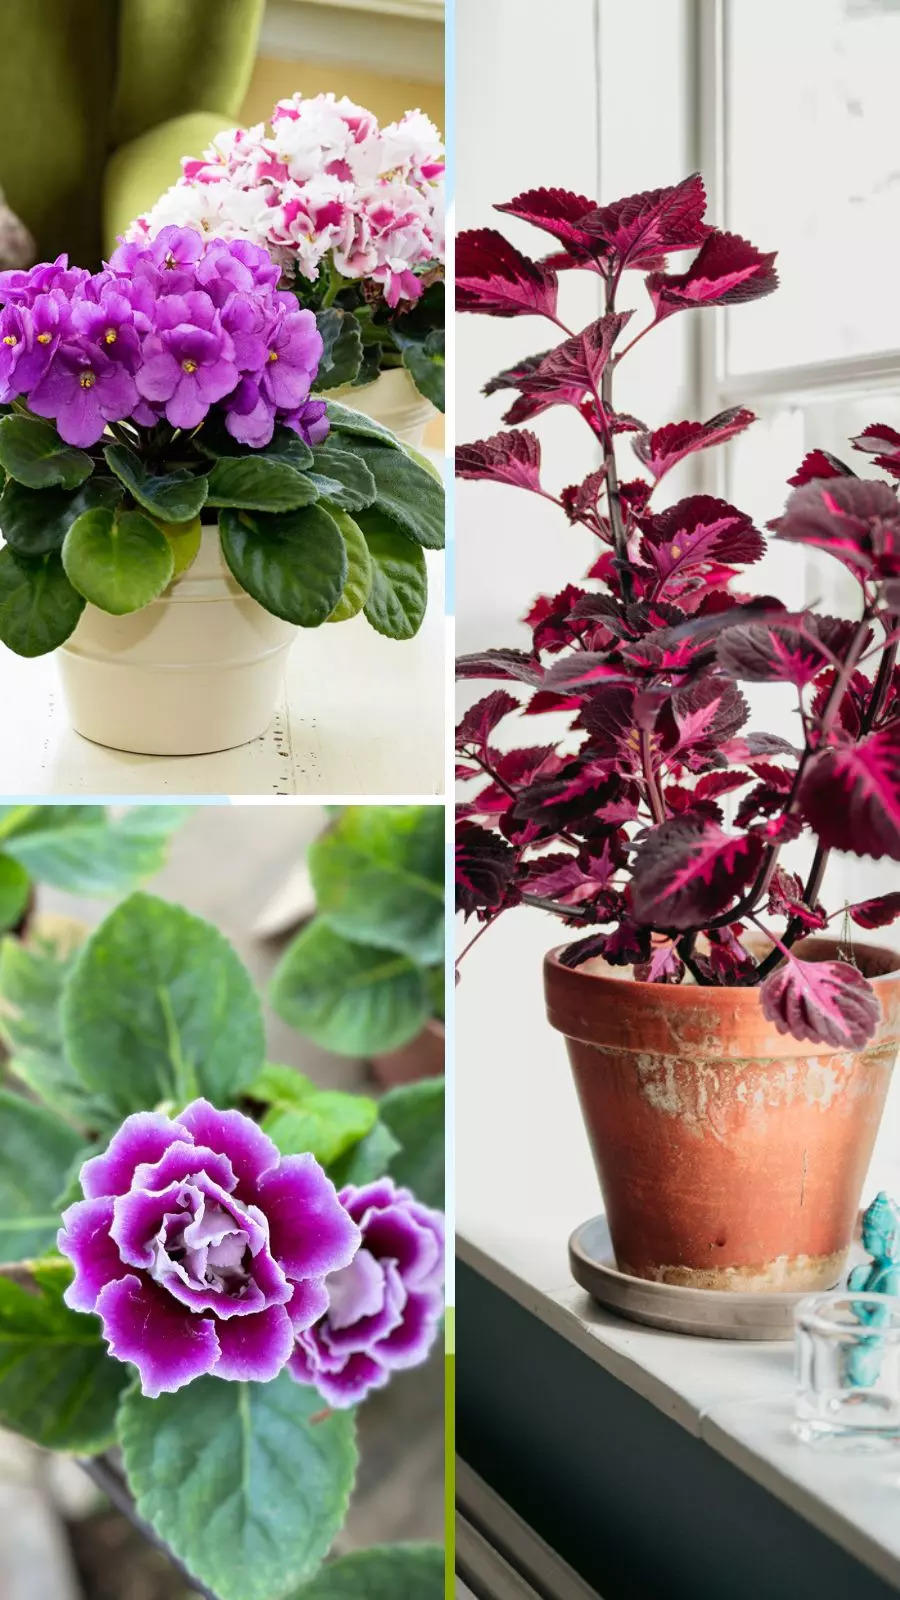 Easy houseplants you can grow from seeds